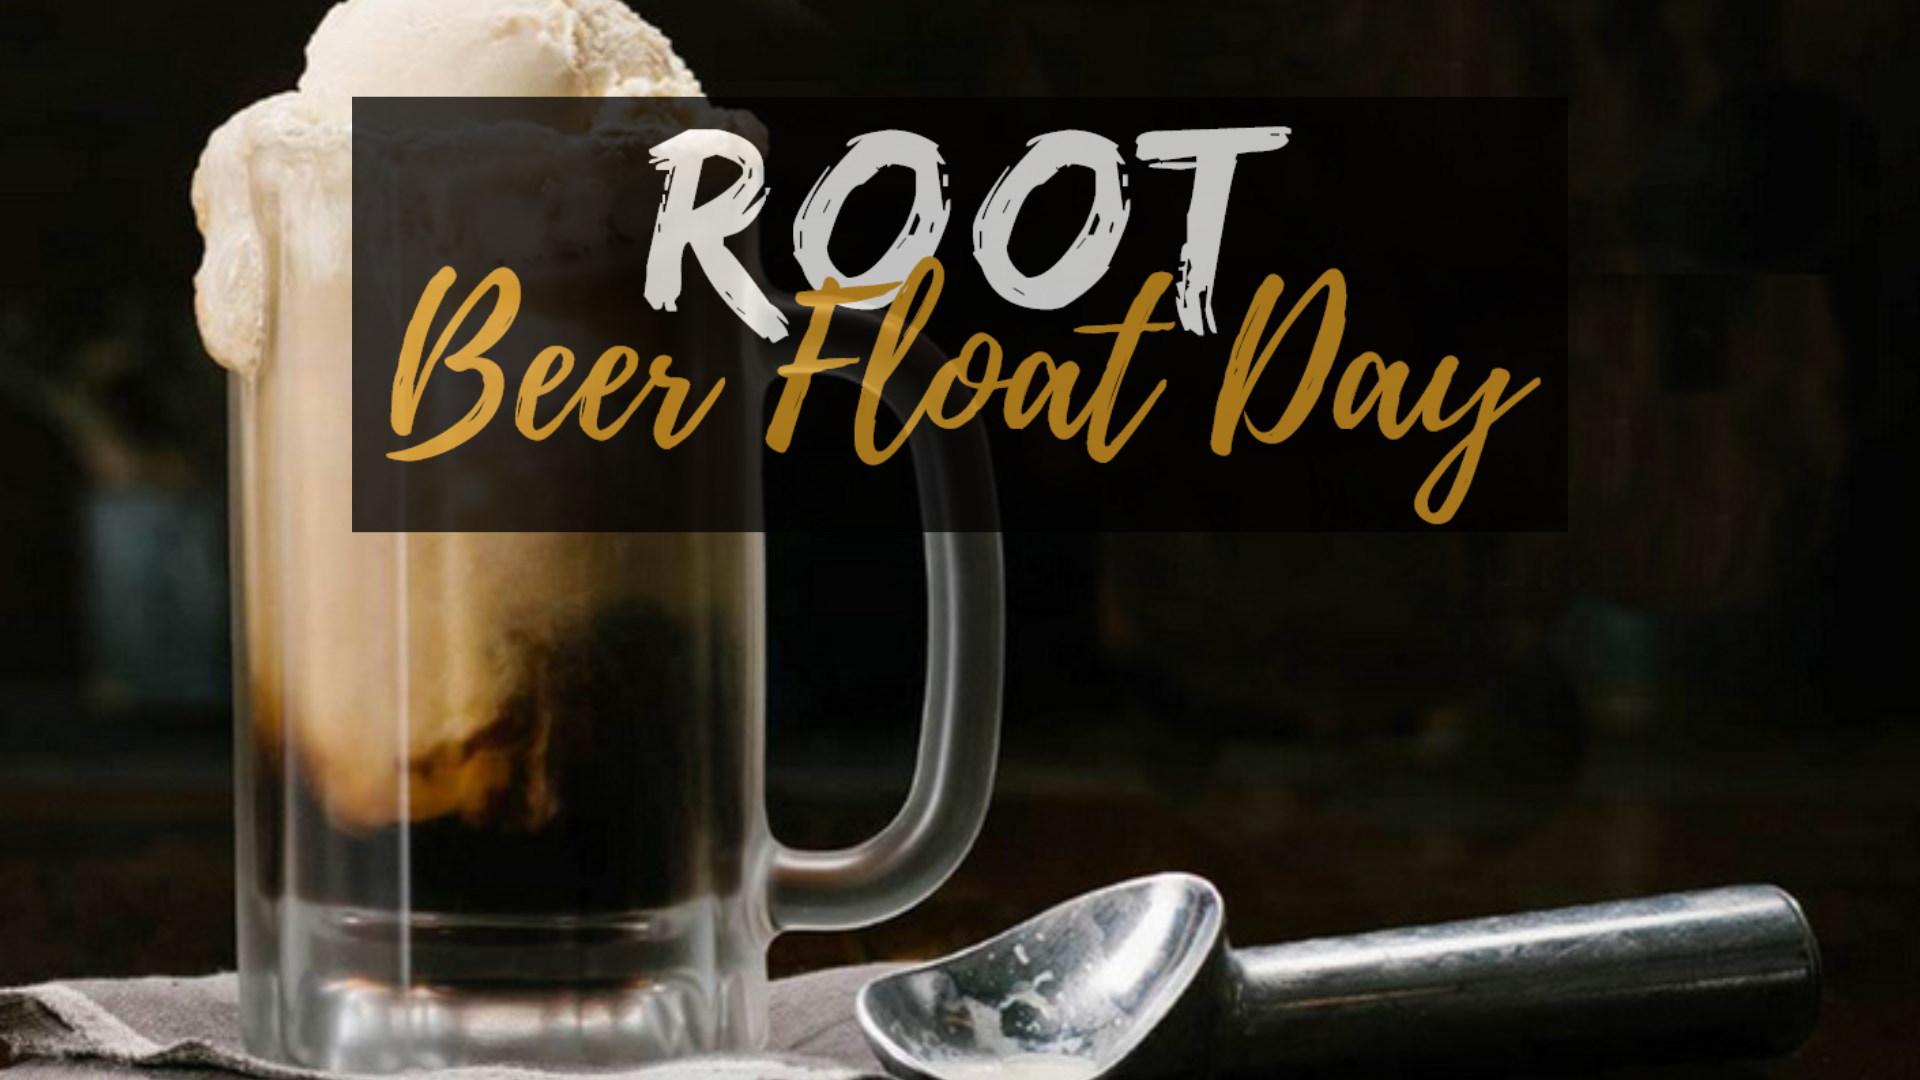 A root beer float with the text "Root Beer Float Day" overlaid